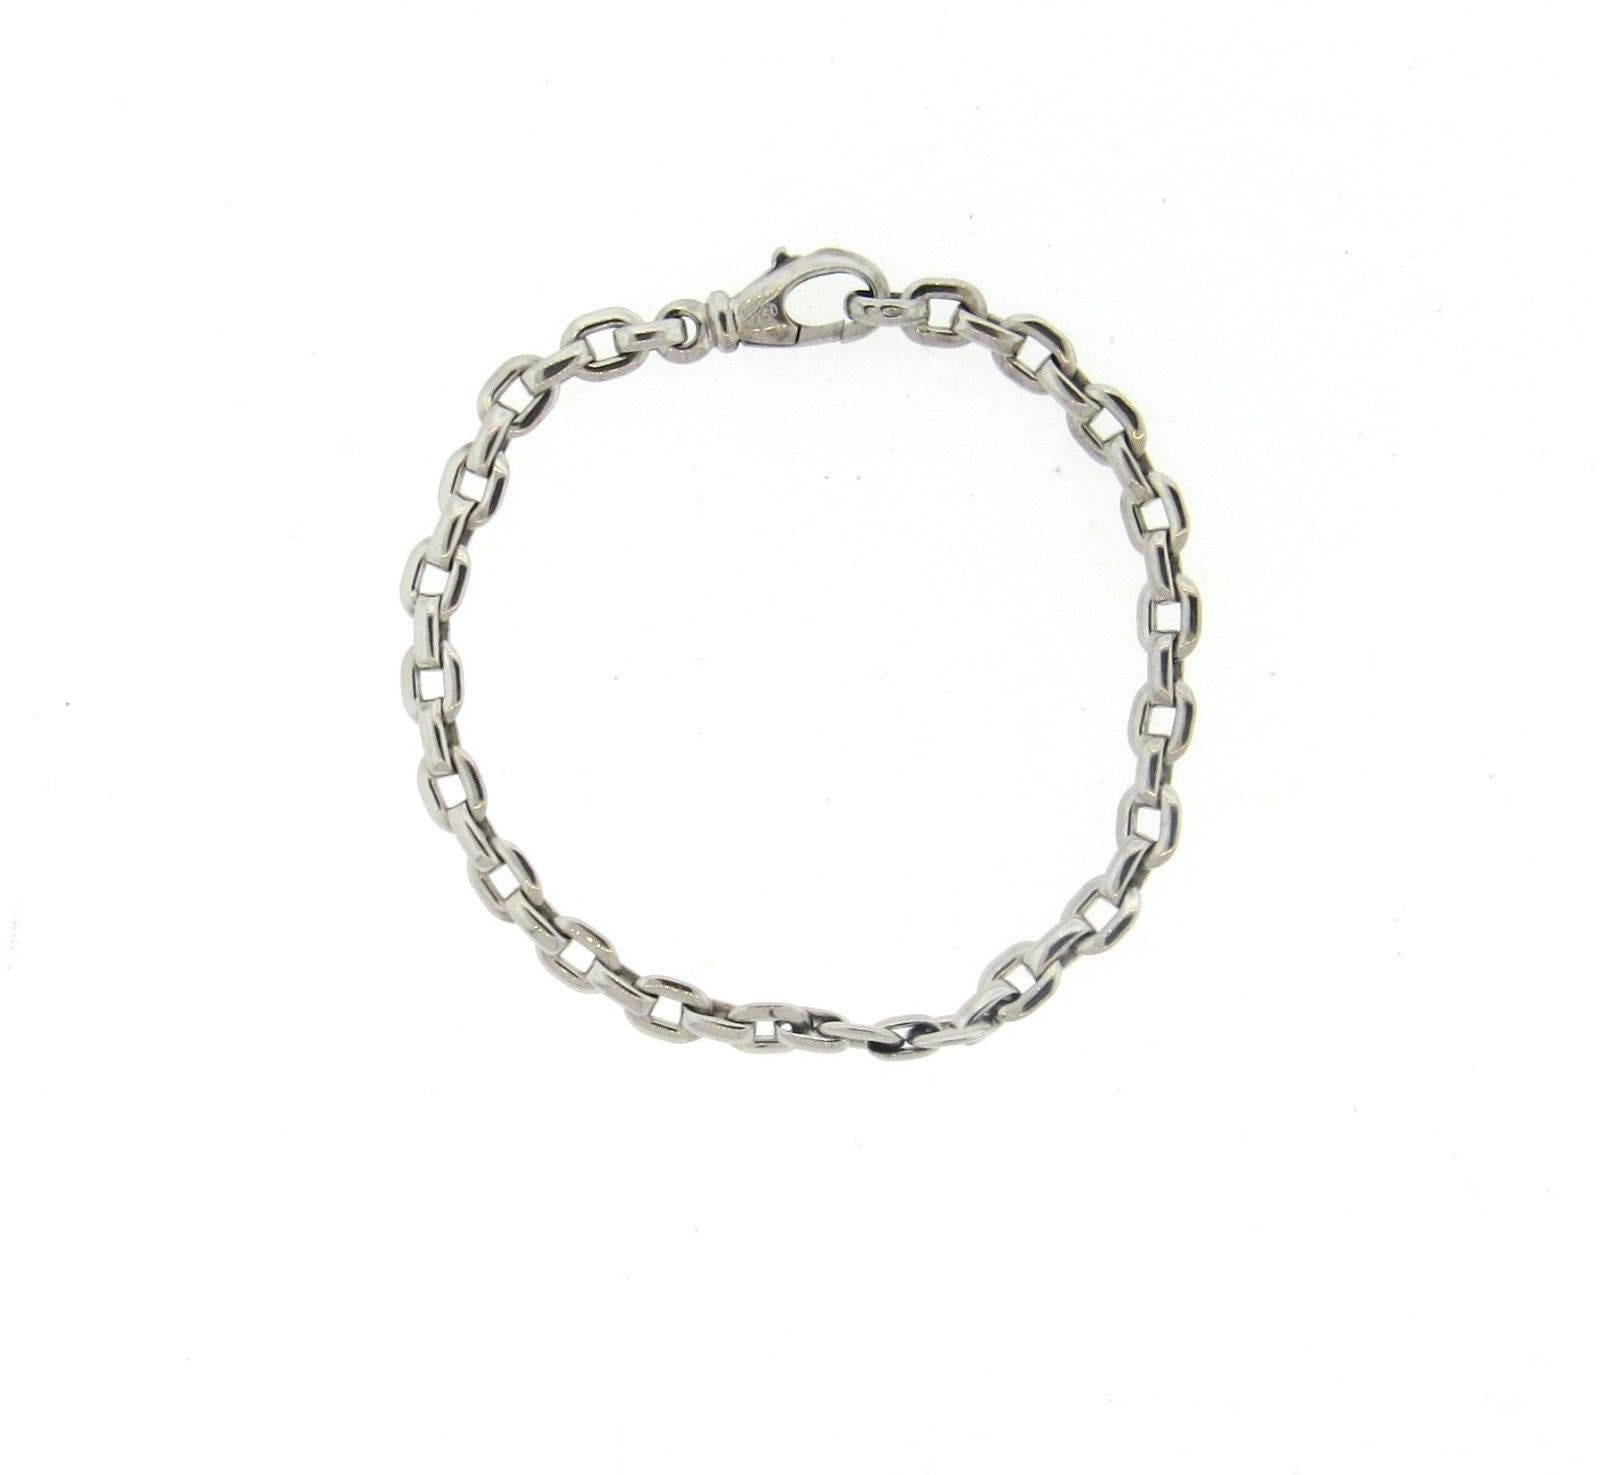 An 18k white gold bracelet crafted by Cartier. The bracelet is 7 1/4